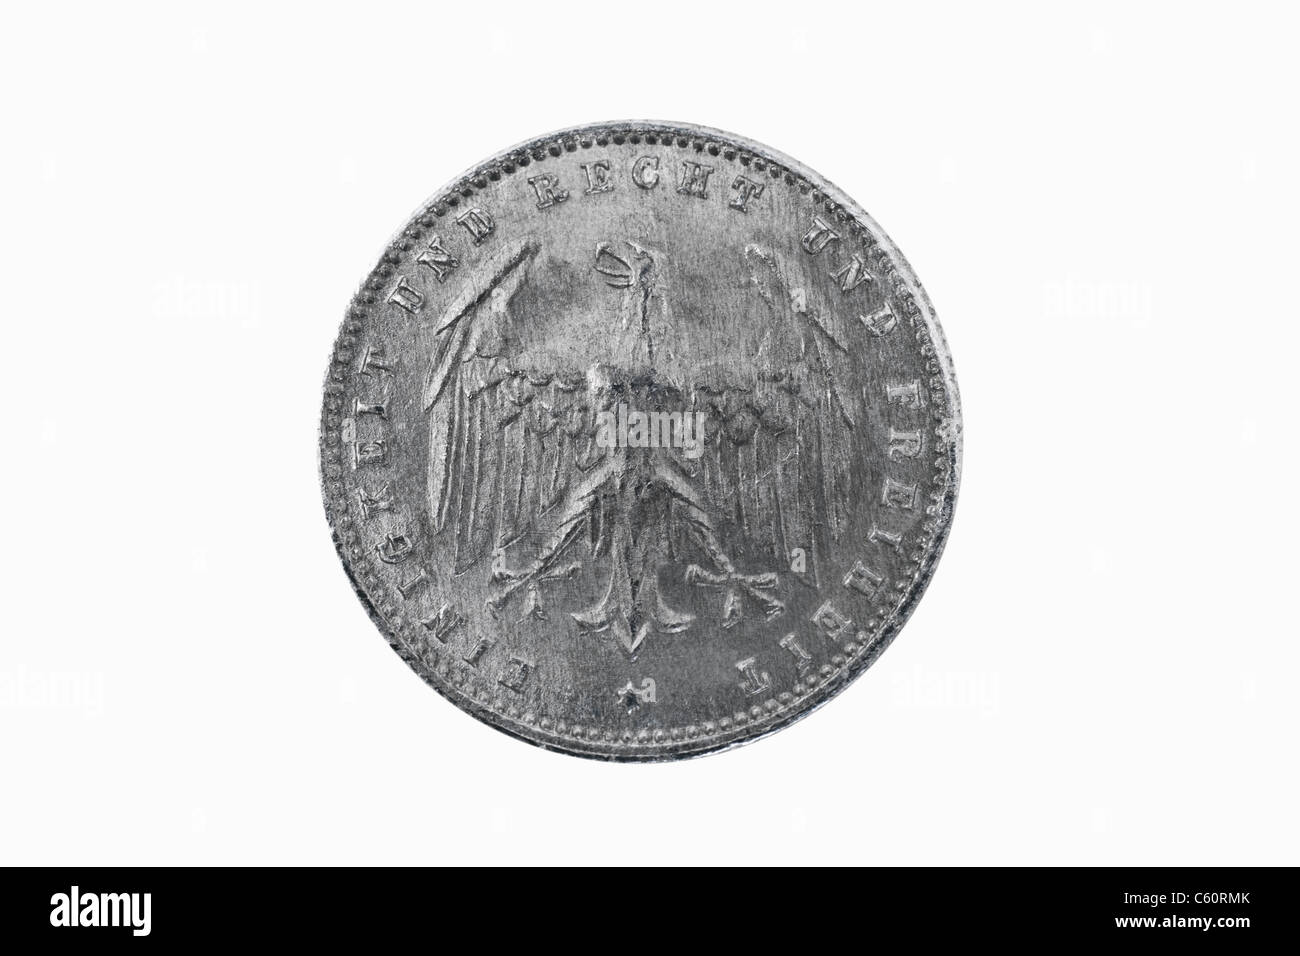 Detail photo of a 200 mark coin of the German Reich from the year 1923 Stock Photo